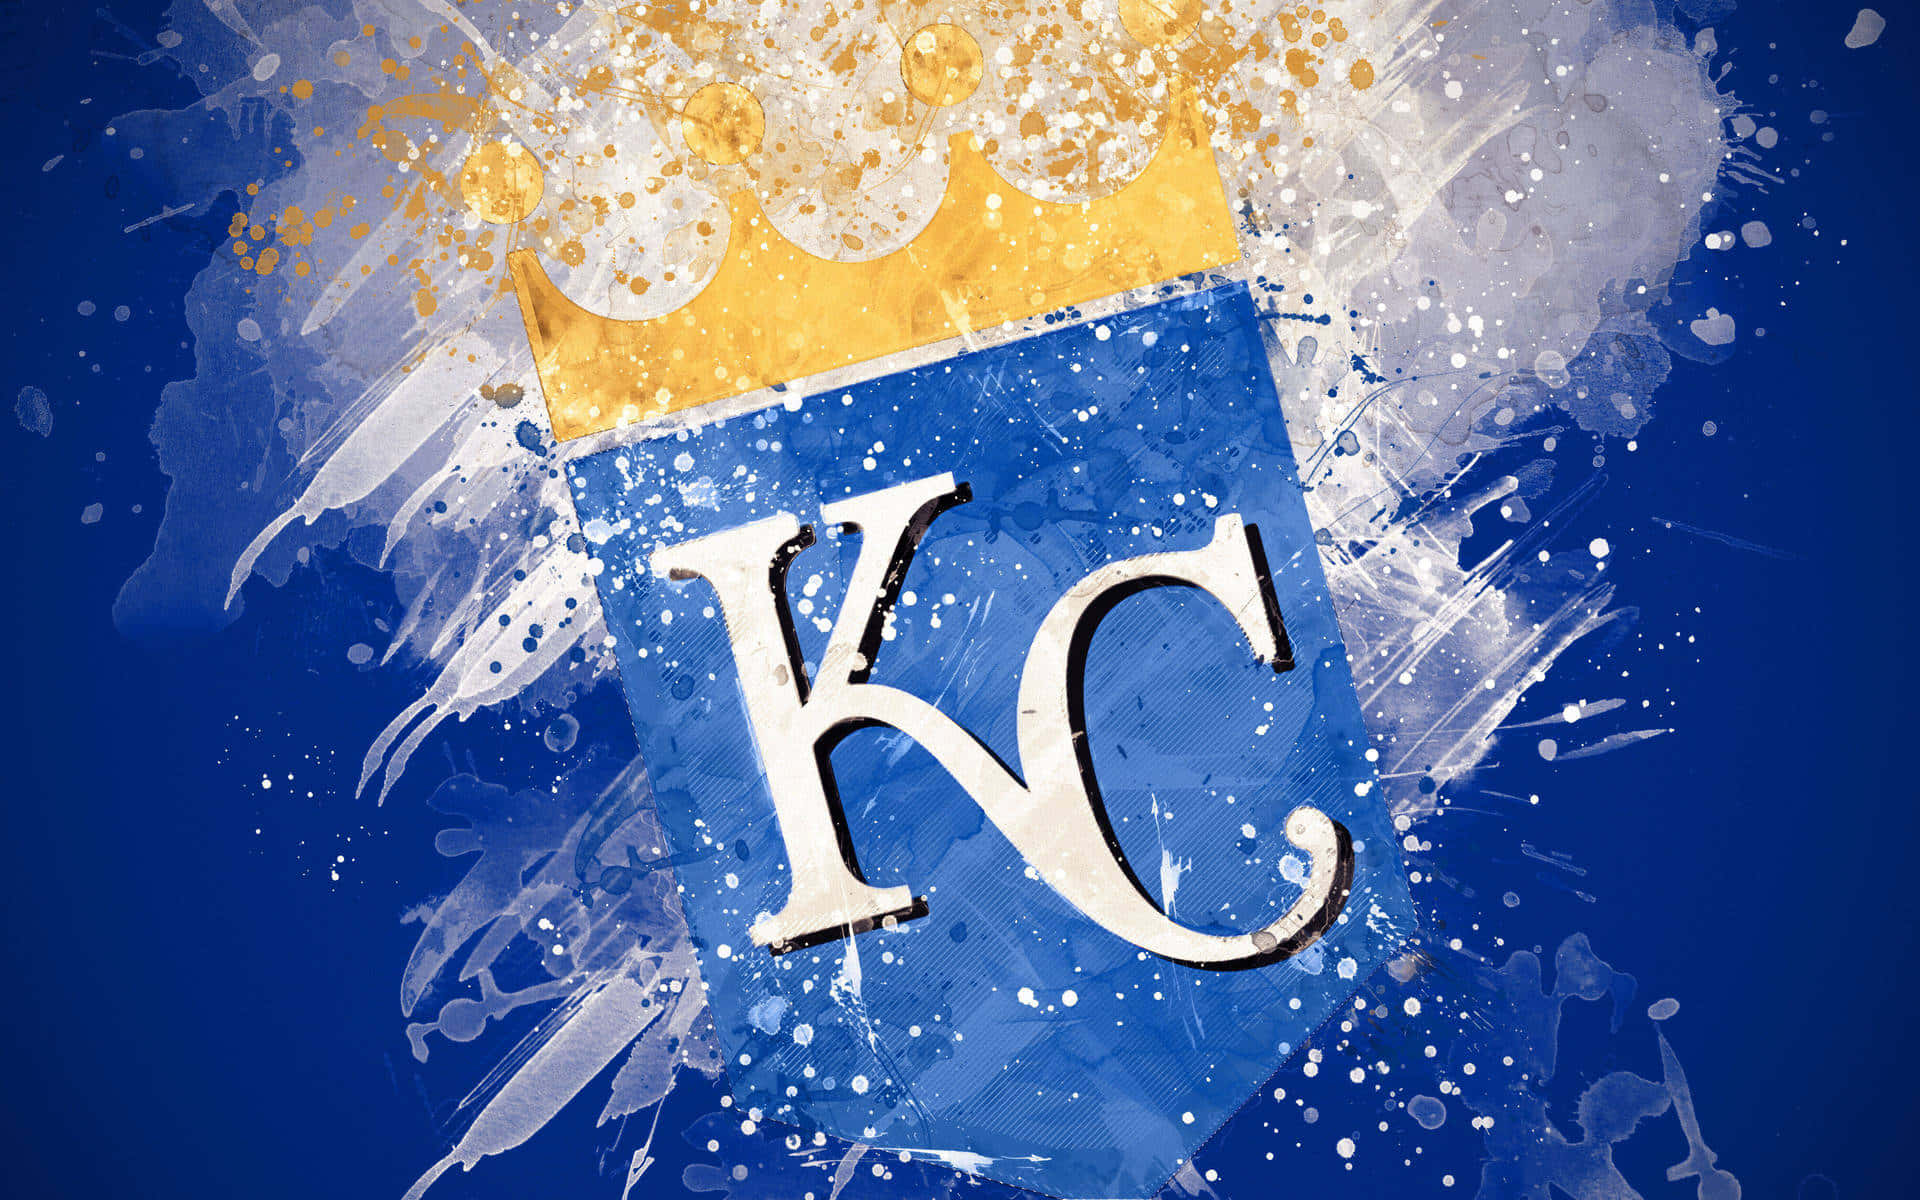 The Kansas City Royals, Striving for Excellence Wallpaper